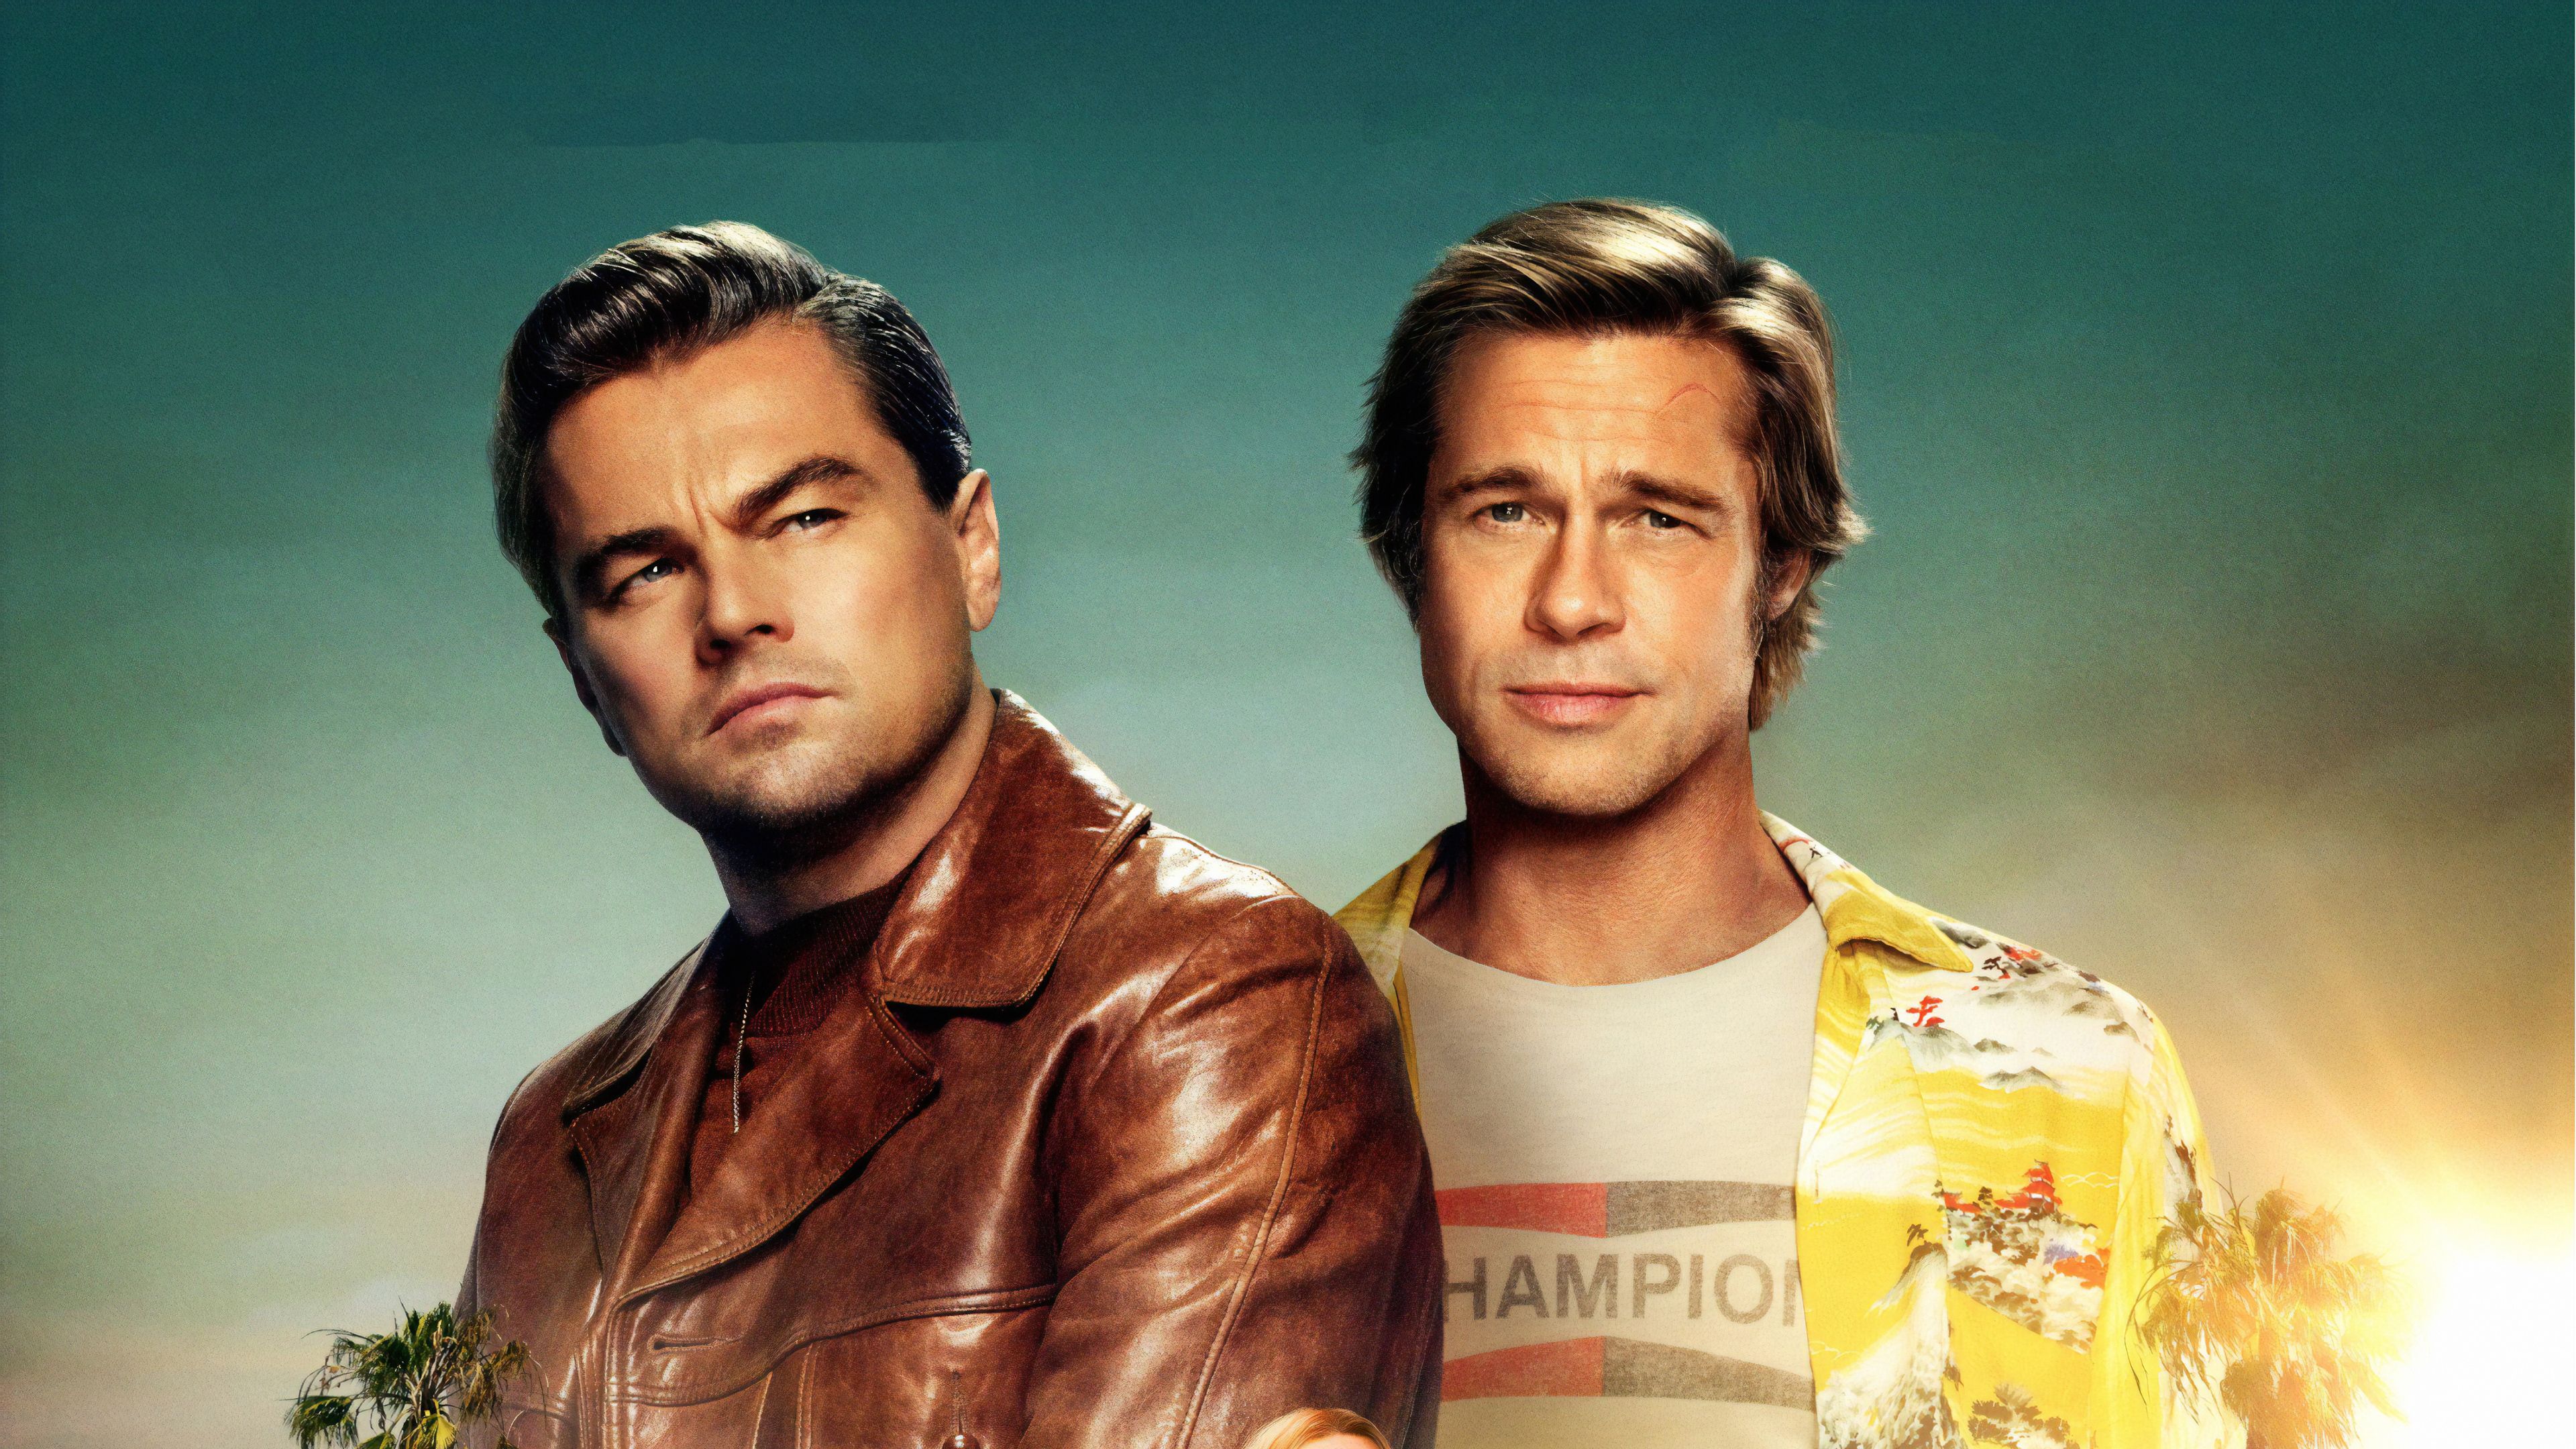 Once Upon A Time In Hollywood 4k 2019 4k HD 4k Wallpaper, Image, Background, Photo and Picture